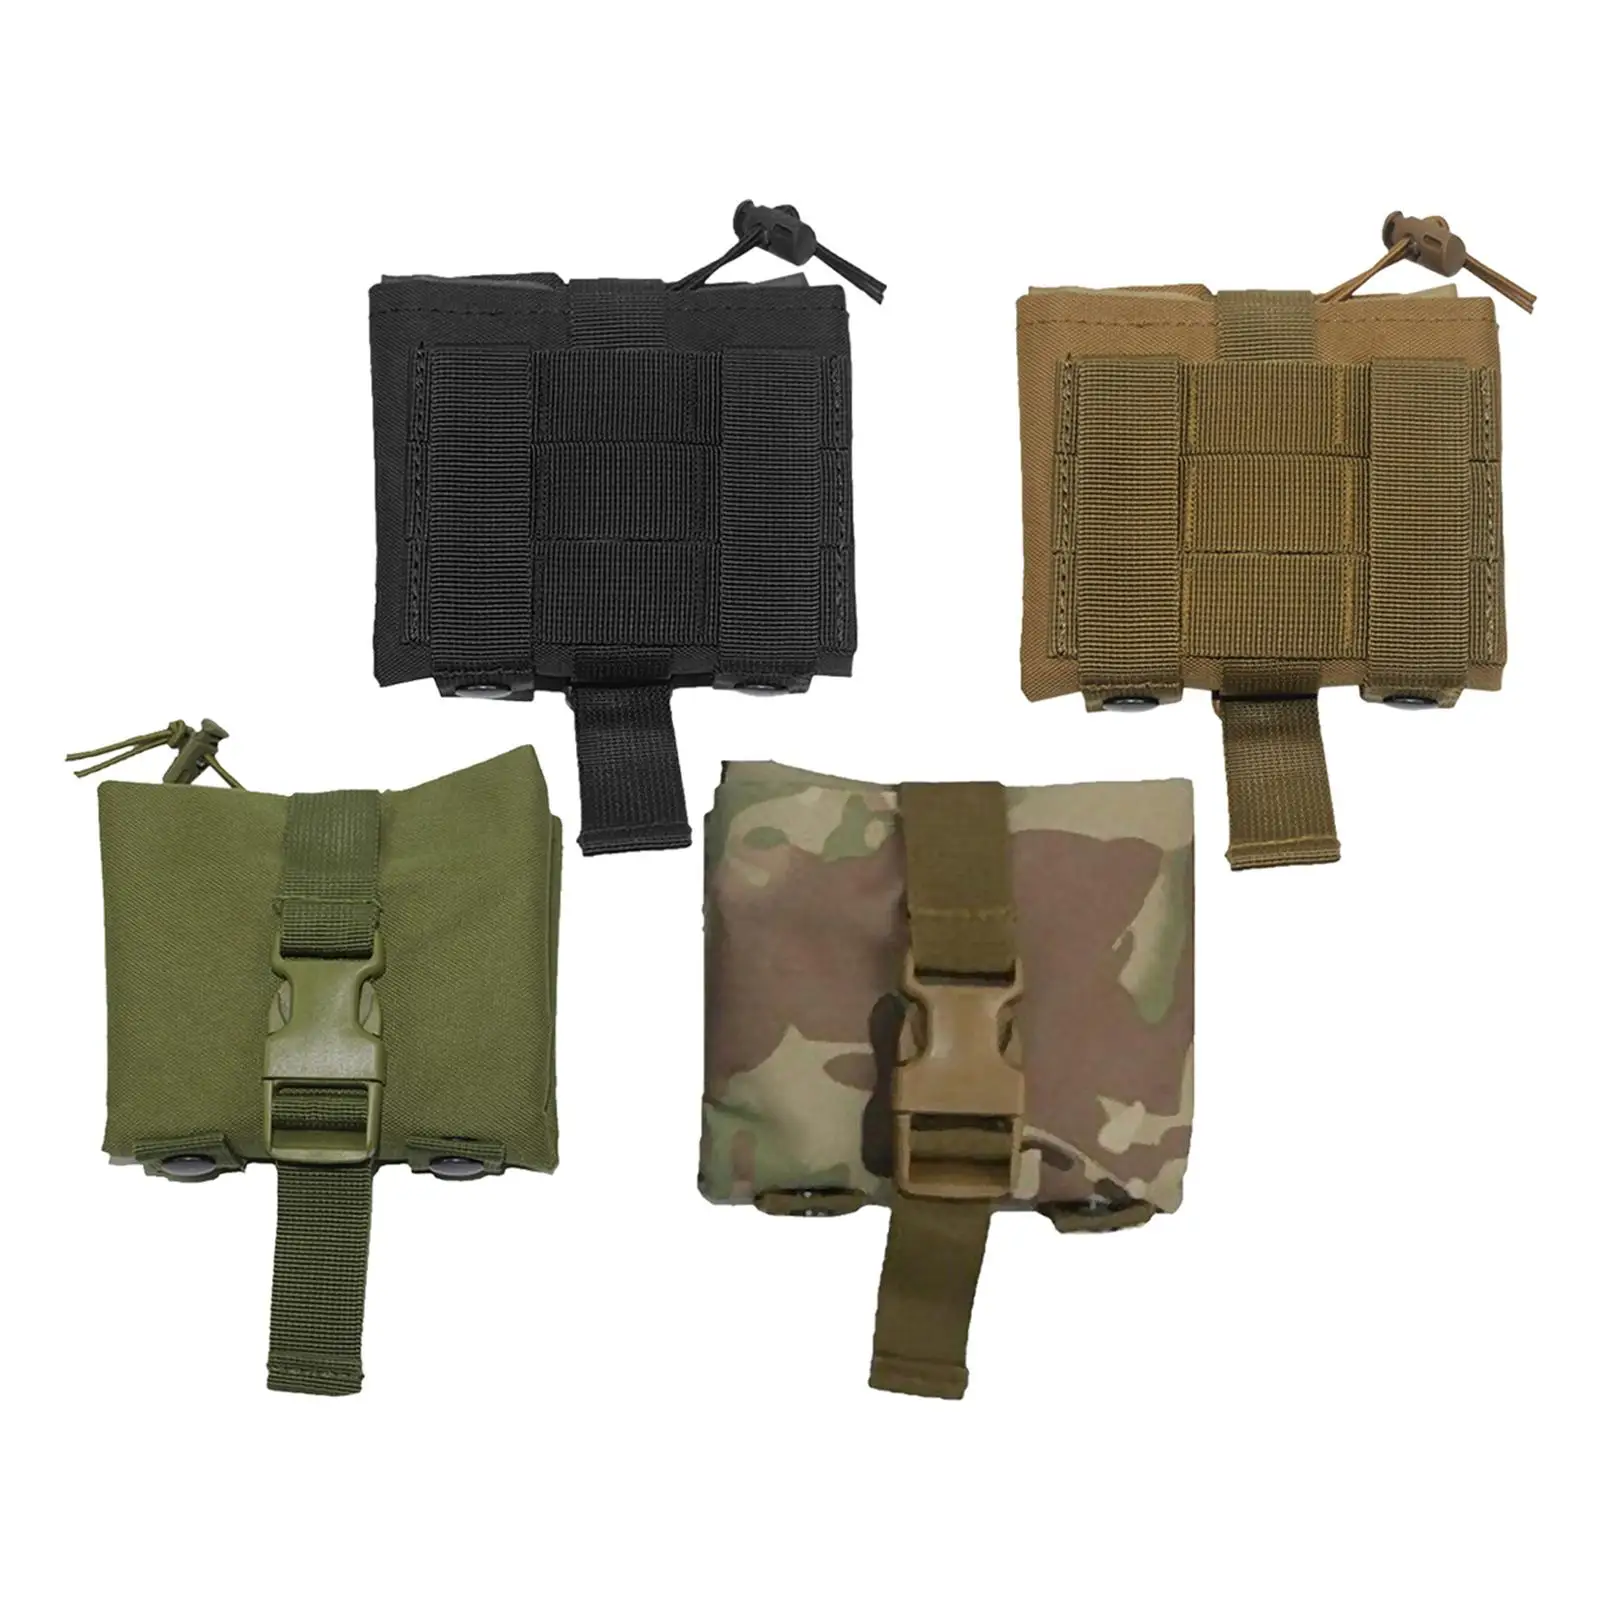 Outside Pouch Collapsible Durable Waist Packs for Outdoor Activities